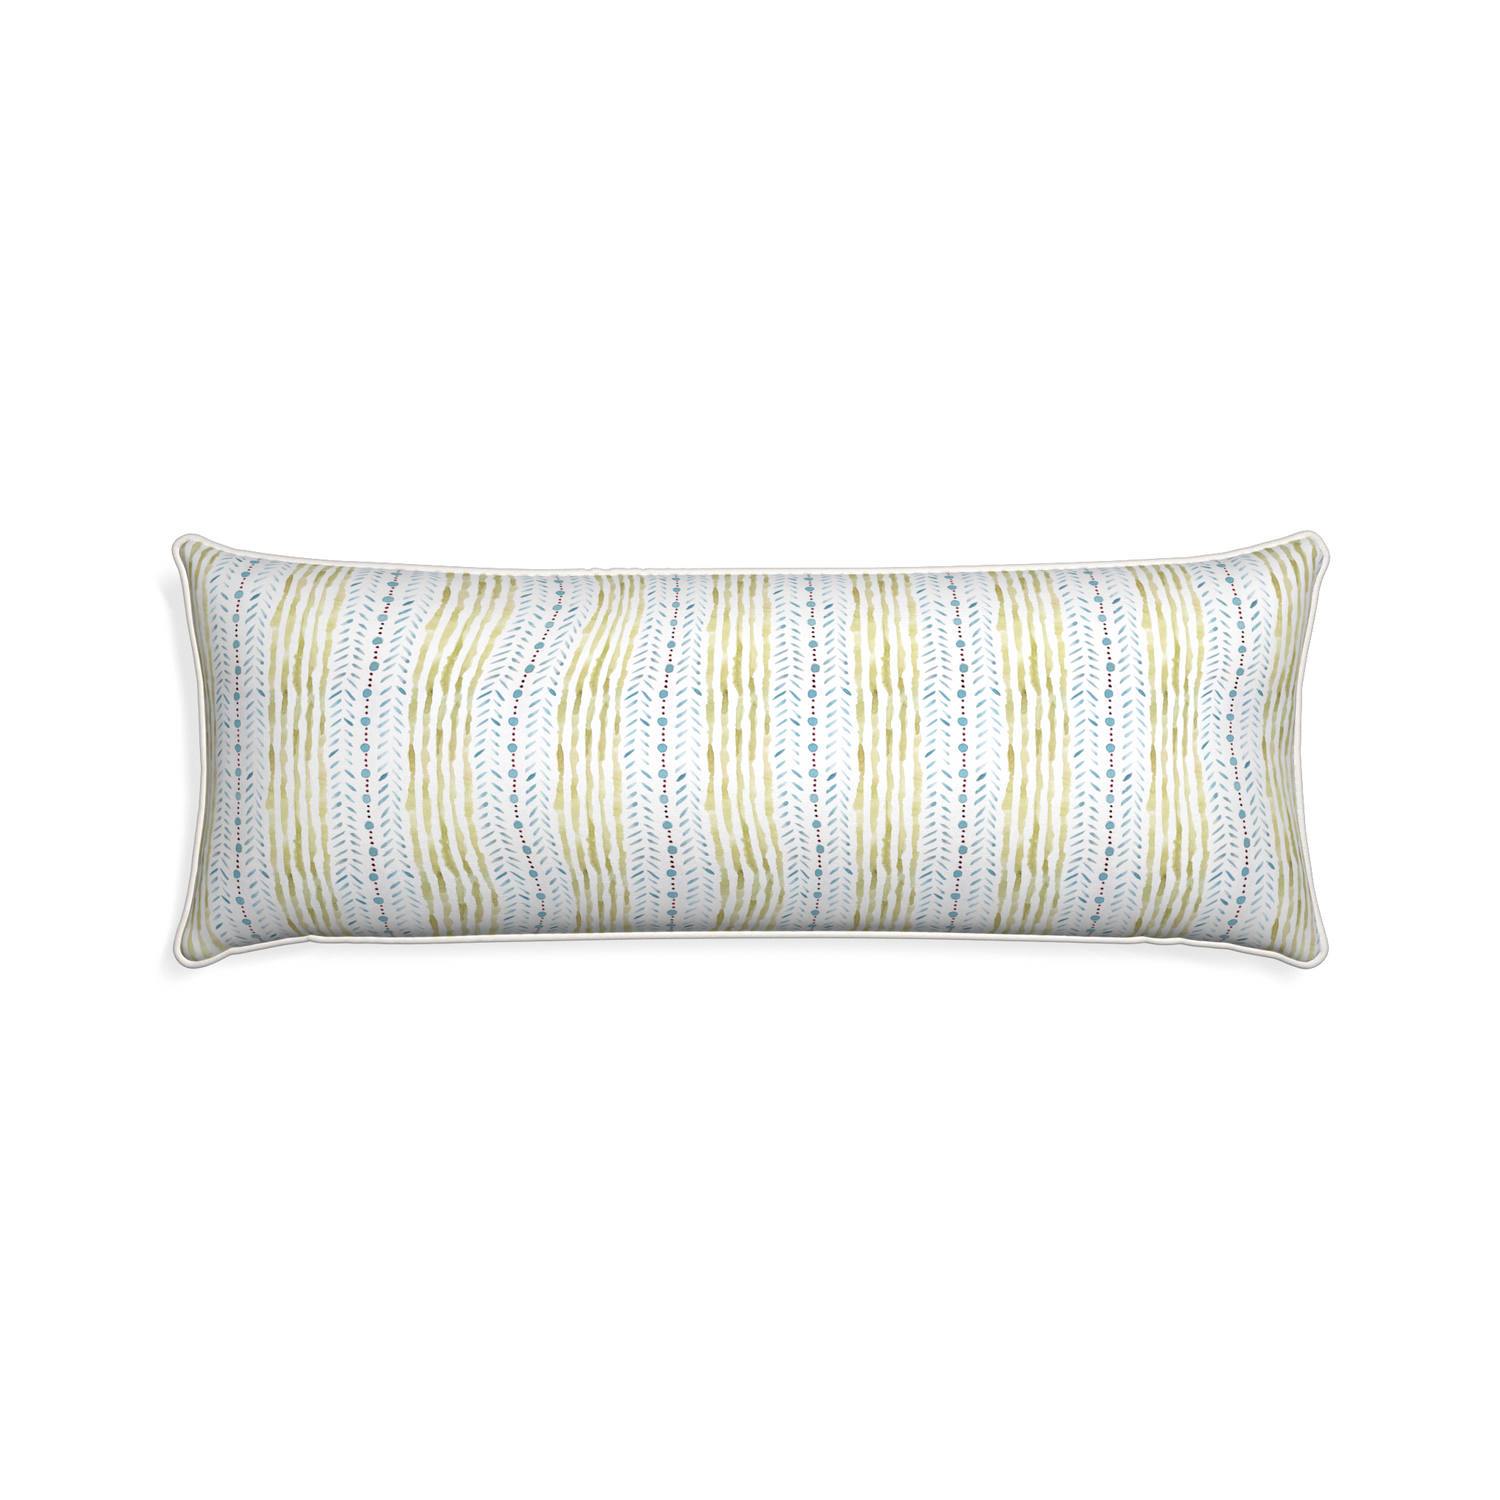 Xl-lumbar julia custom pillow with snow piping on white background